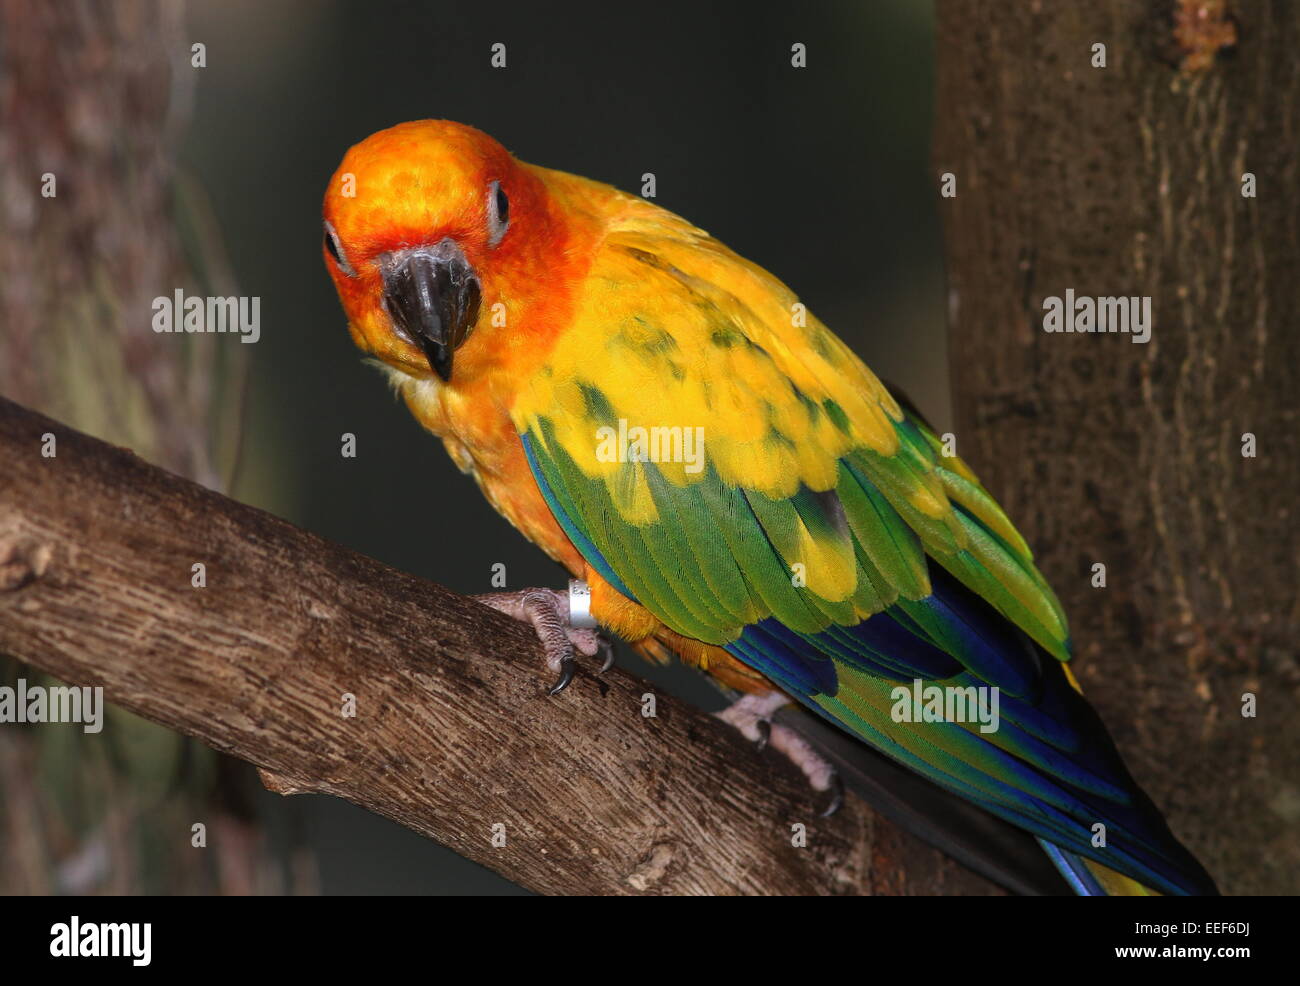 South American Sun Parakeet or Sun Conure (Aratinga solstitialis) perched on a branch, seen in profile Stock Photo